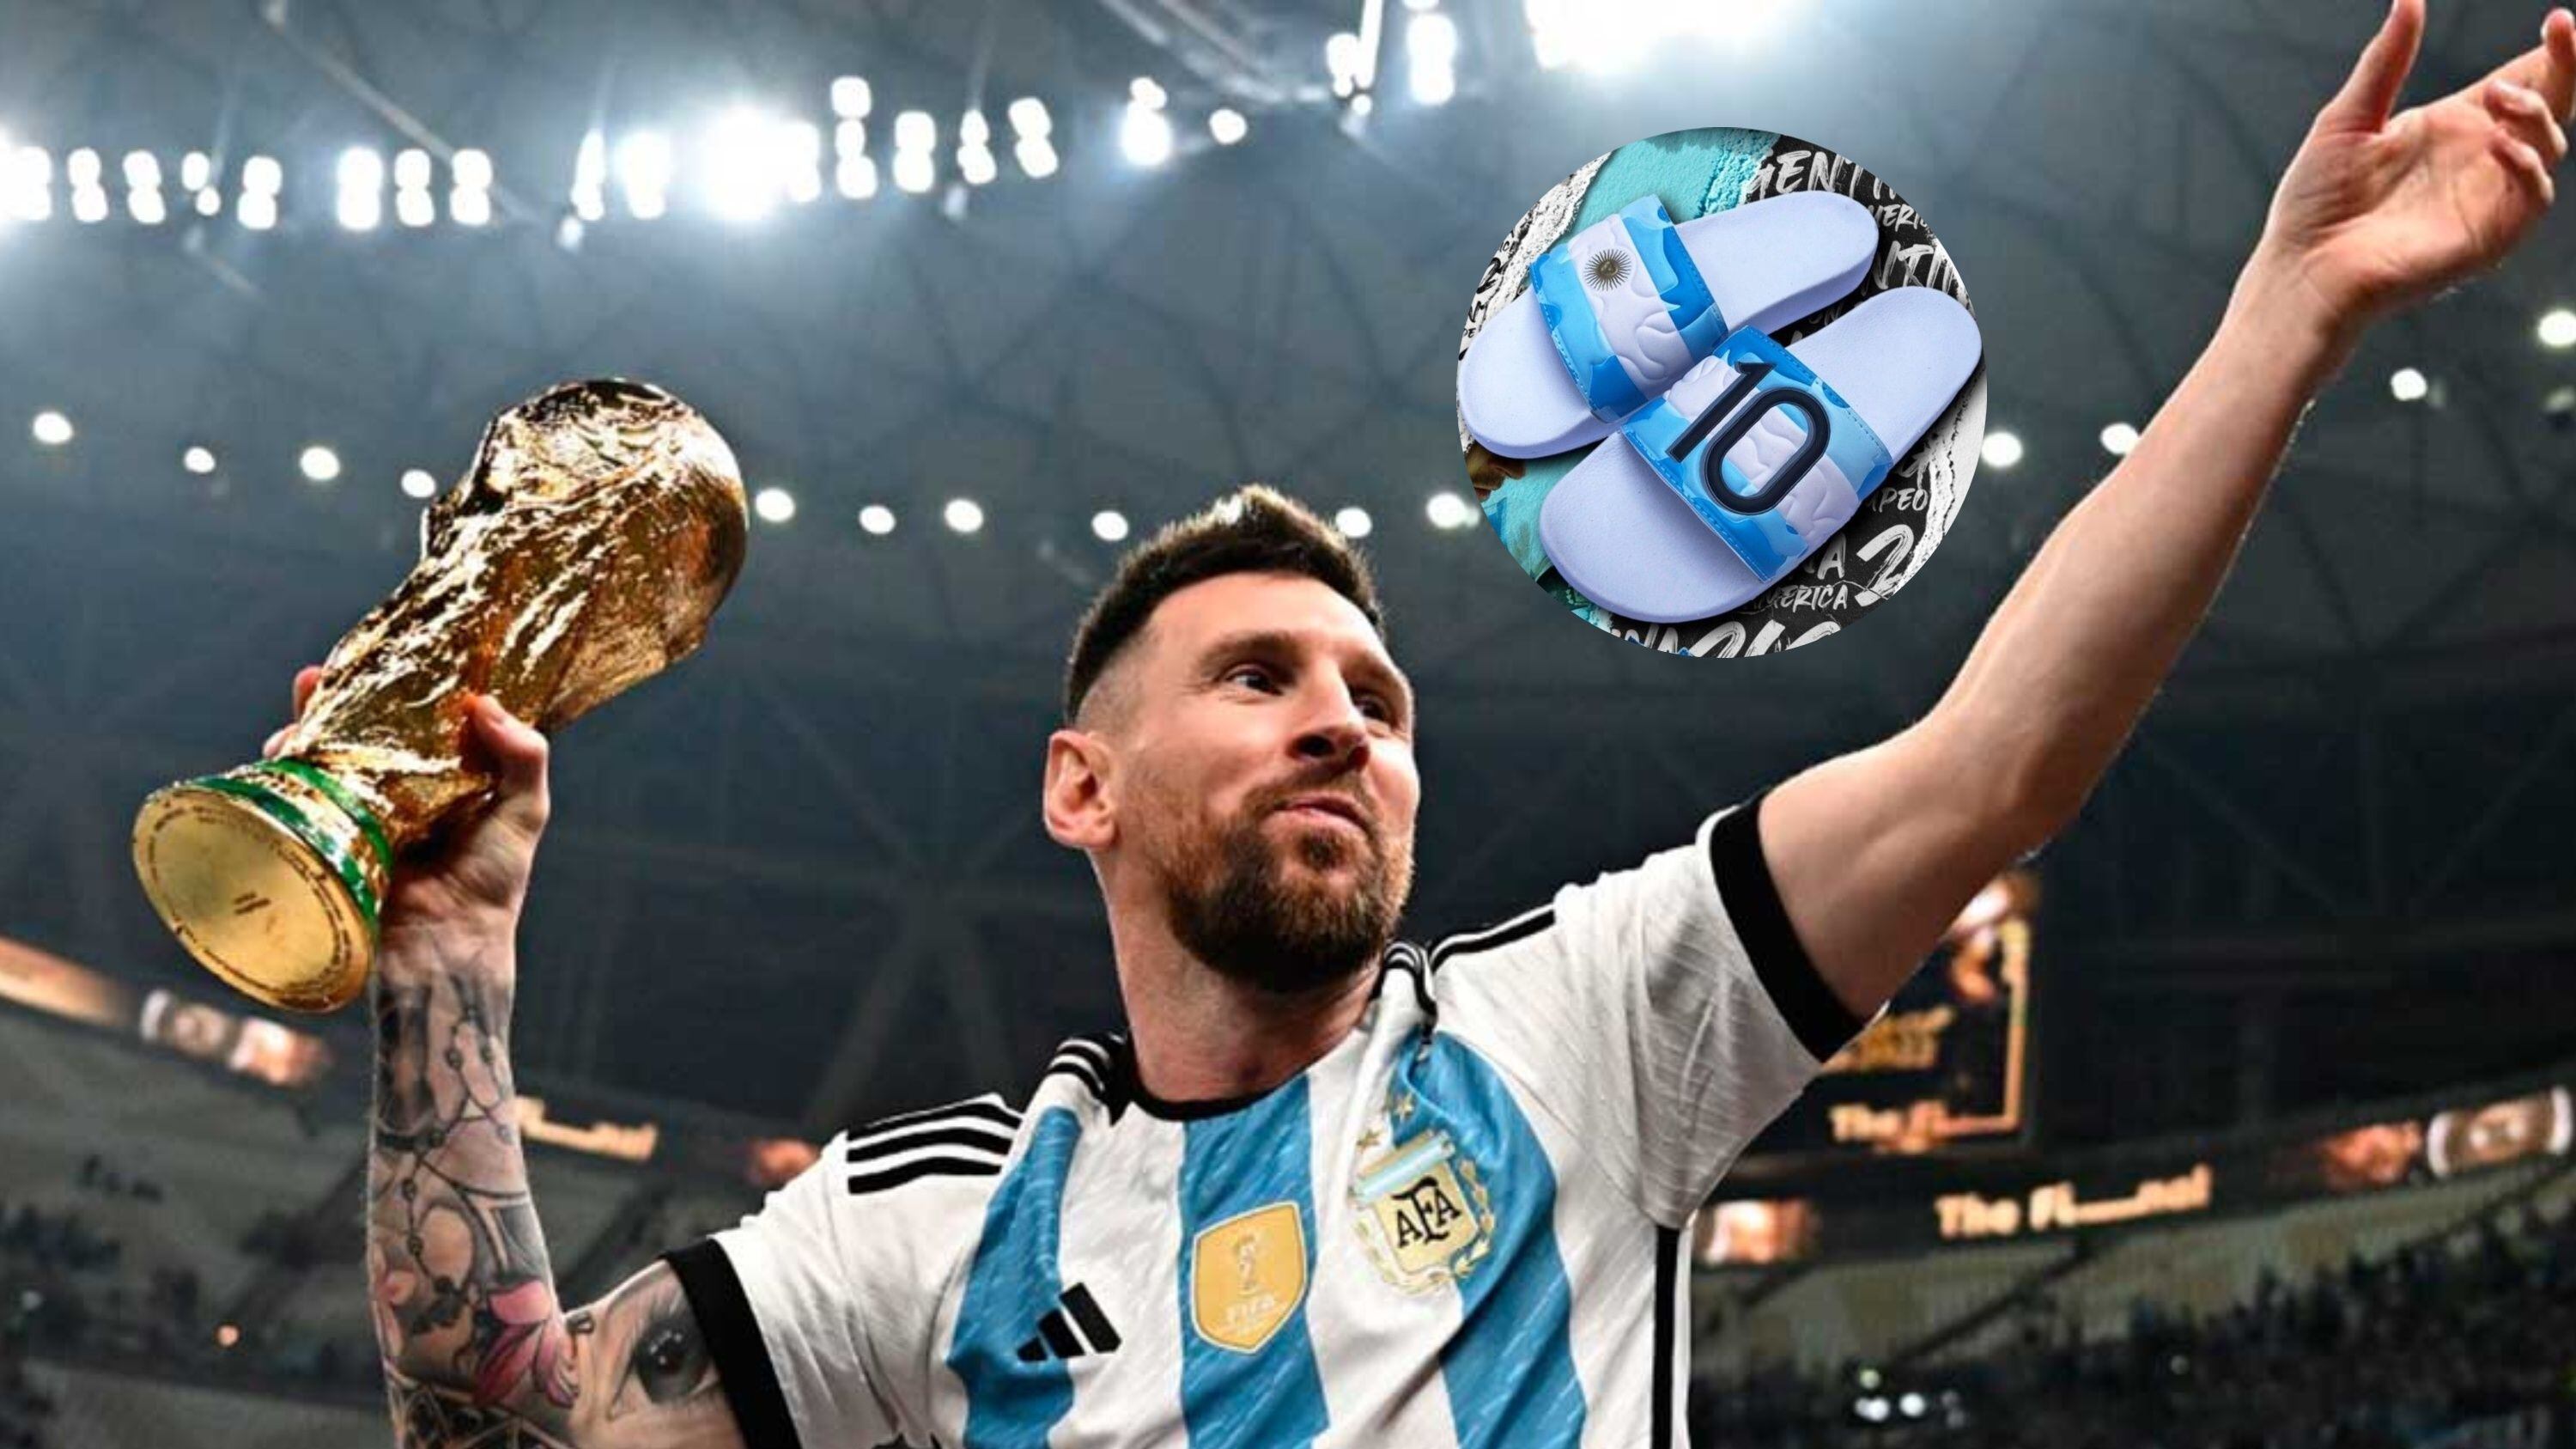 A few hours after returning to PSG with Mbappe, the news that Messi received in Argentina